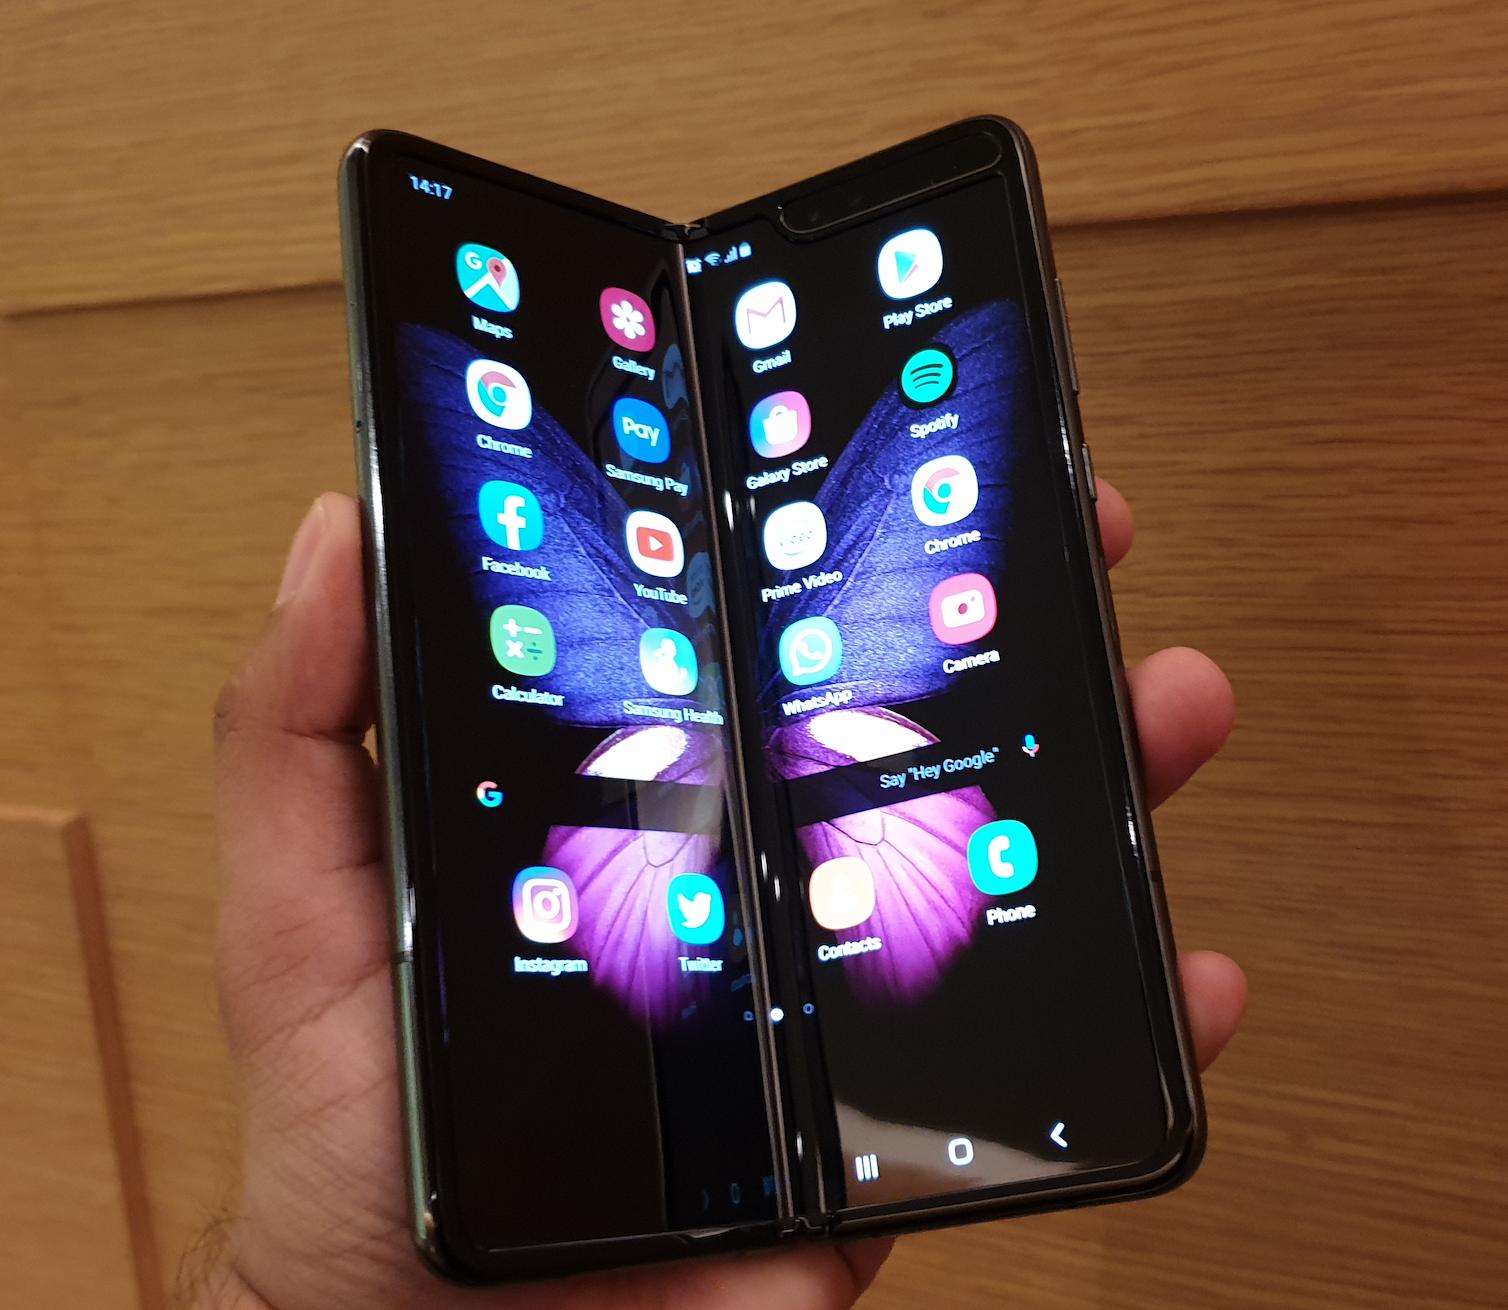 World’s first foldable smartphone, Samsung Galaxy Fold, launches in